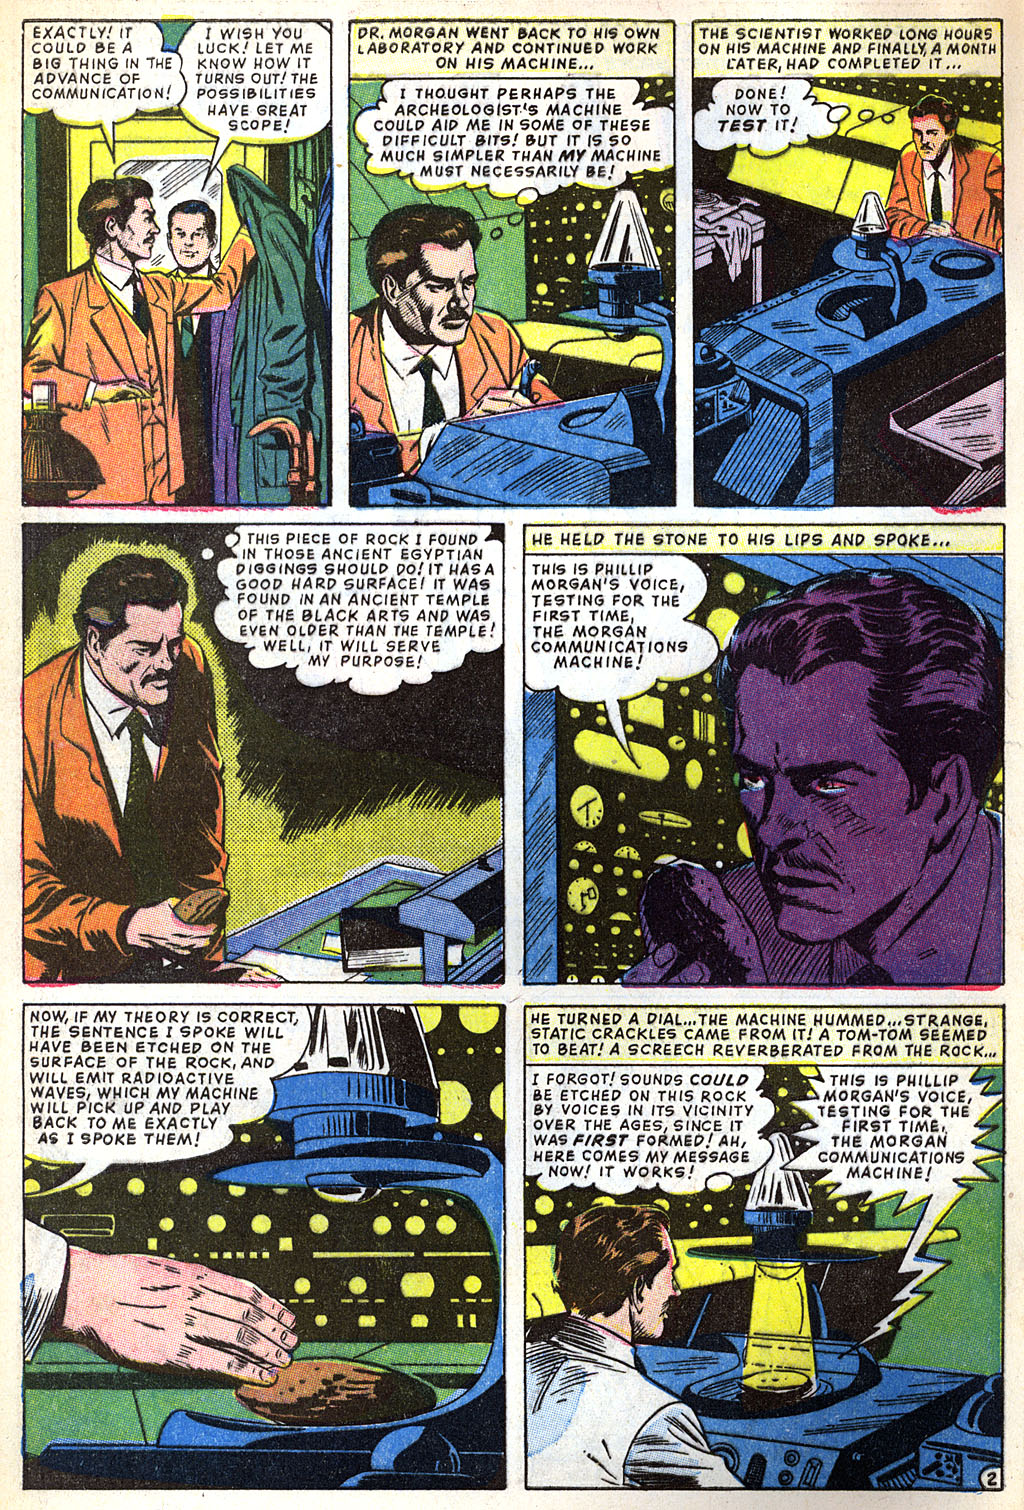 Journey Into Mystery (1952) 40 Page 3